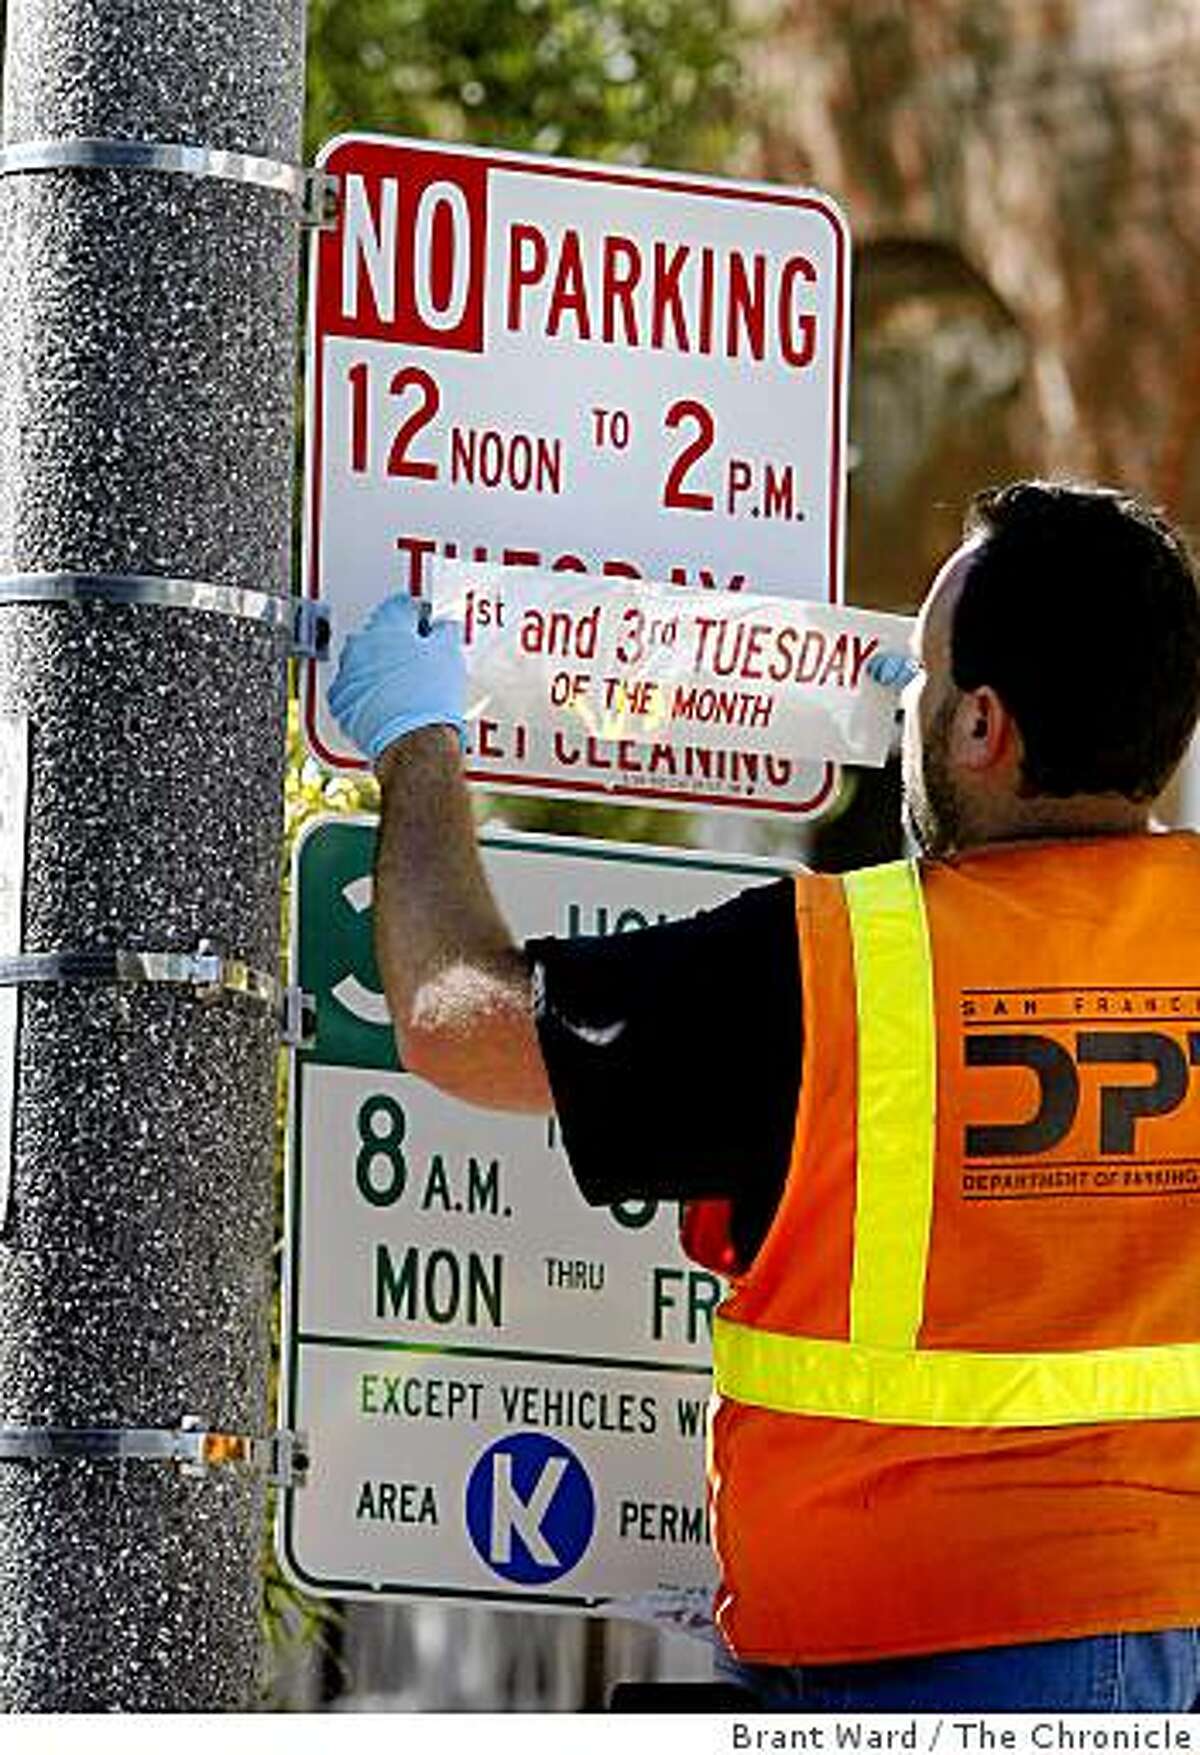 Mike Turner of Dept. of Parking and Traffic changed street sweeping signs Monday August 25, 2008 along Filbert Street near Divisadero.Residents of San Francisco's Marina district who park on the street will get a break as the city scales back weekly street sweeping in many residential neighborhoods.